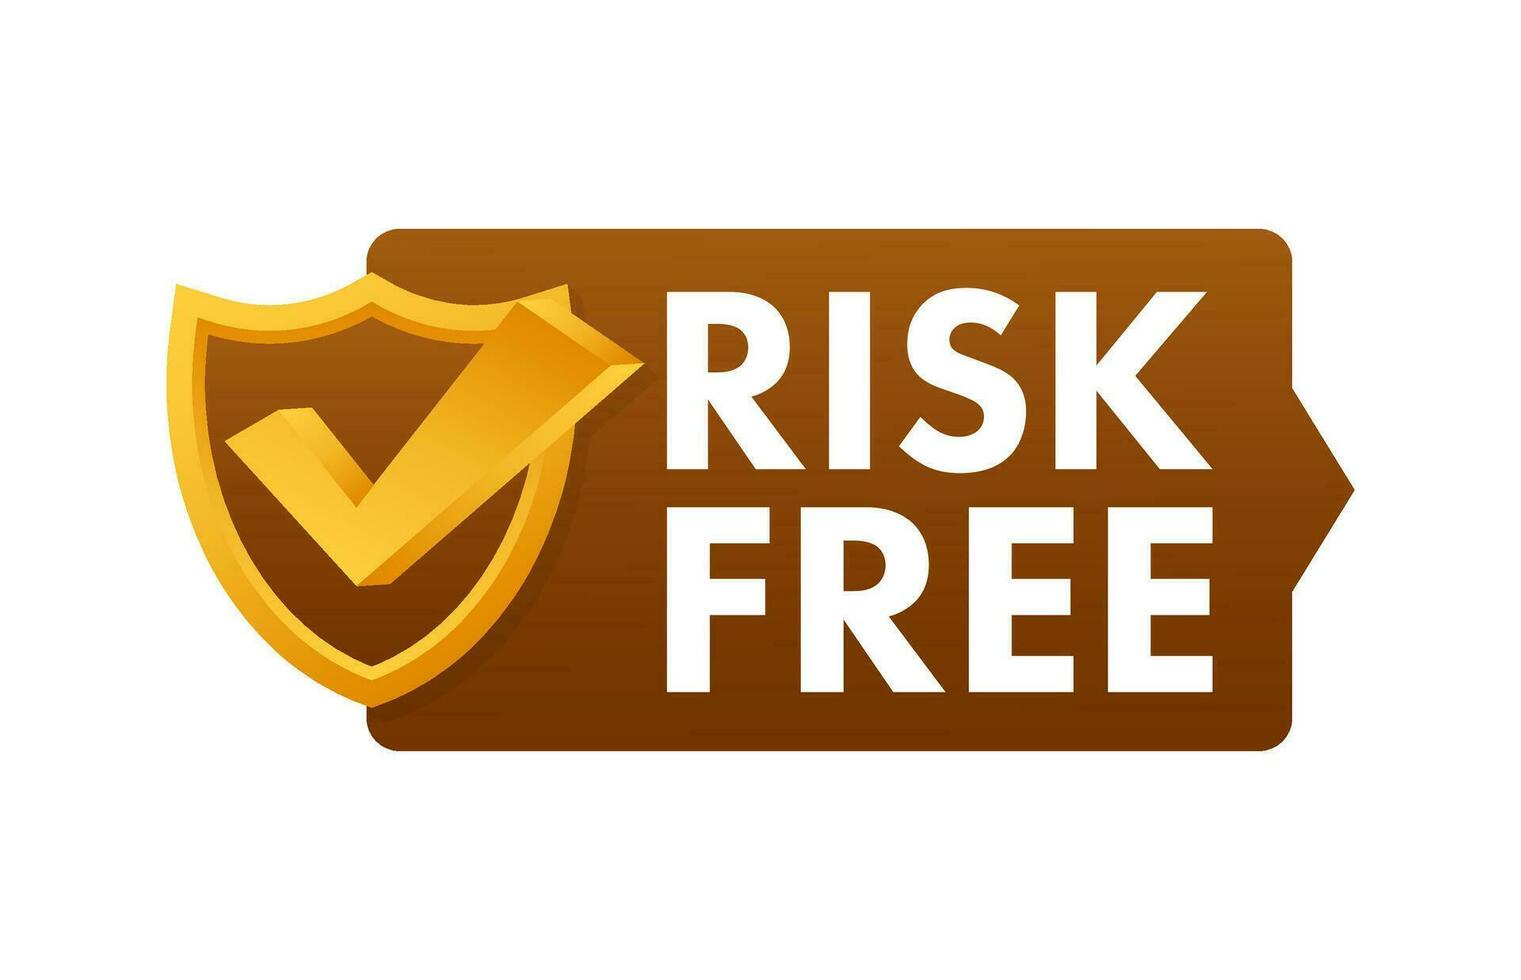 Risk free, guarantee label on white background. Vector stock illustration.